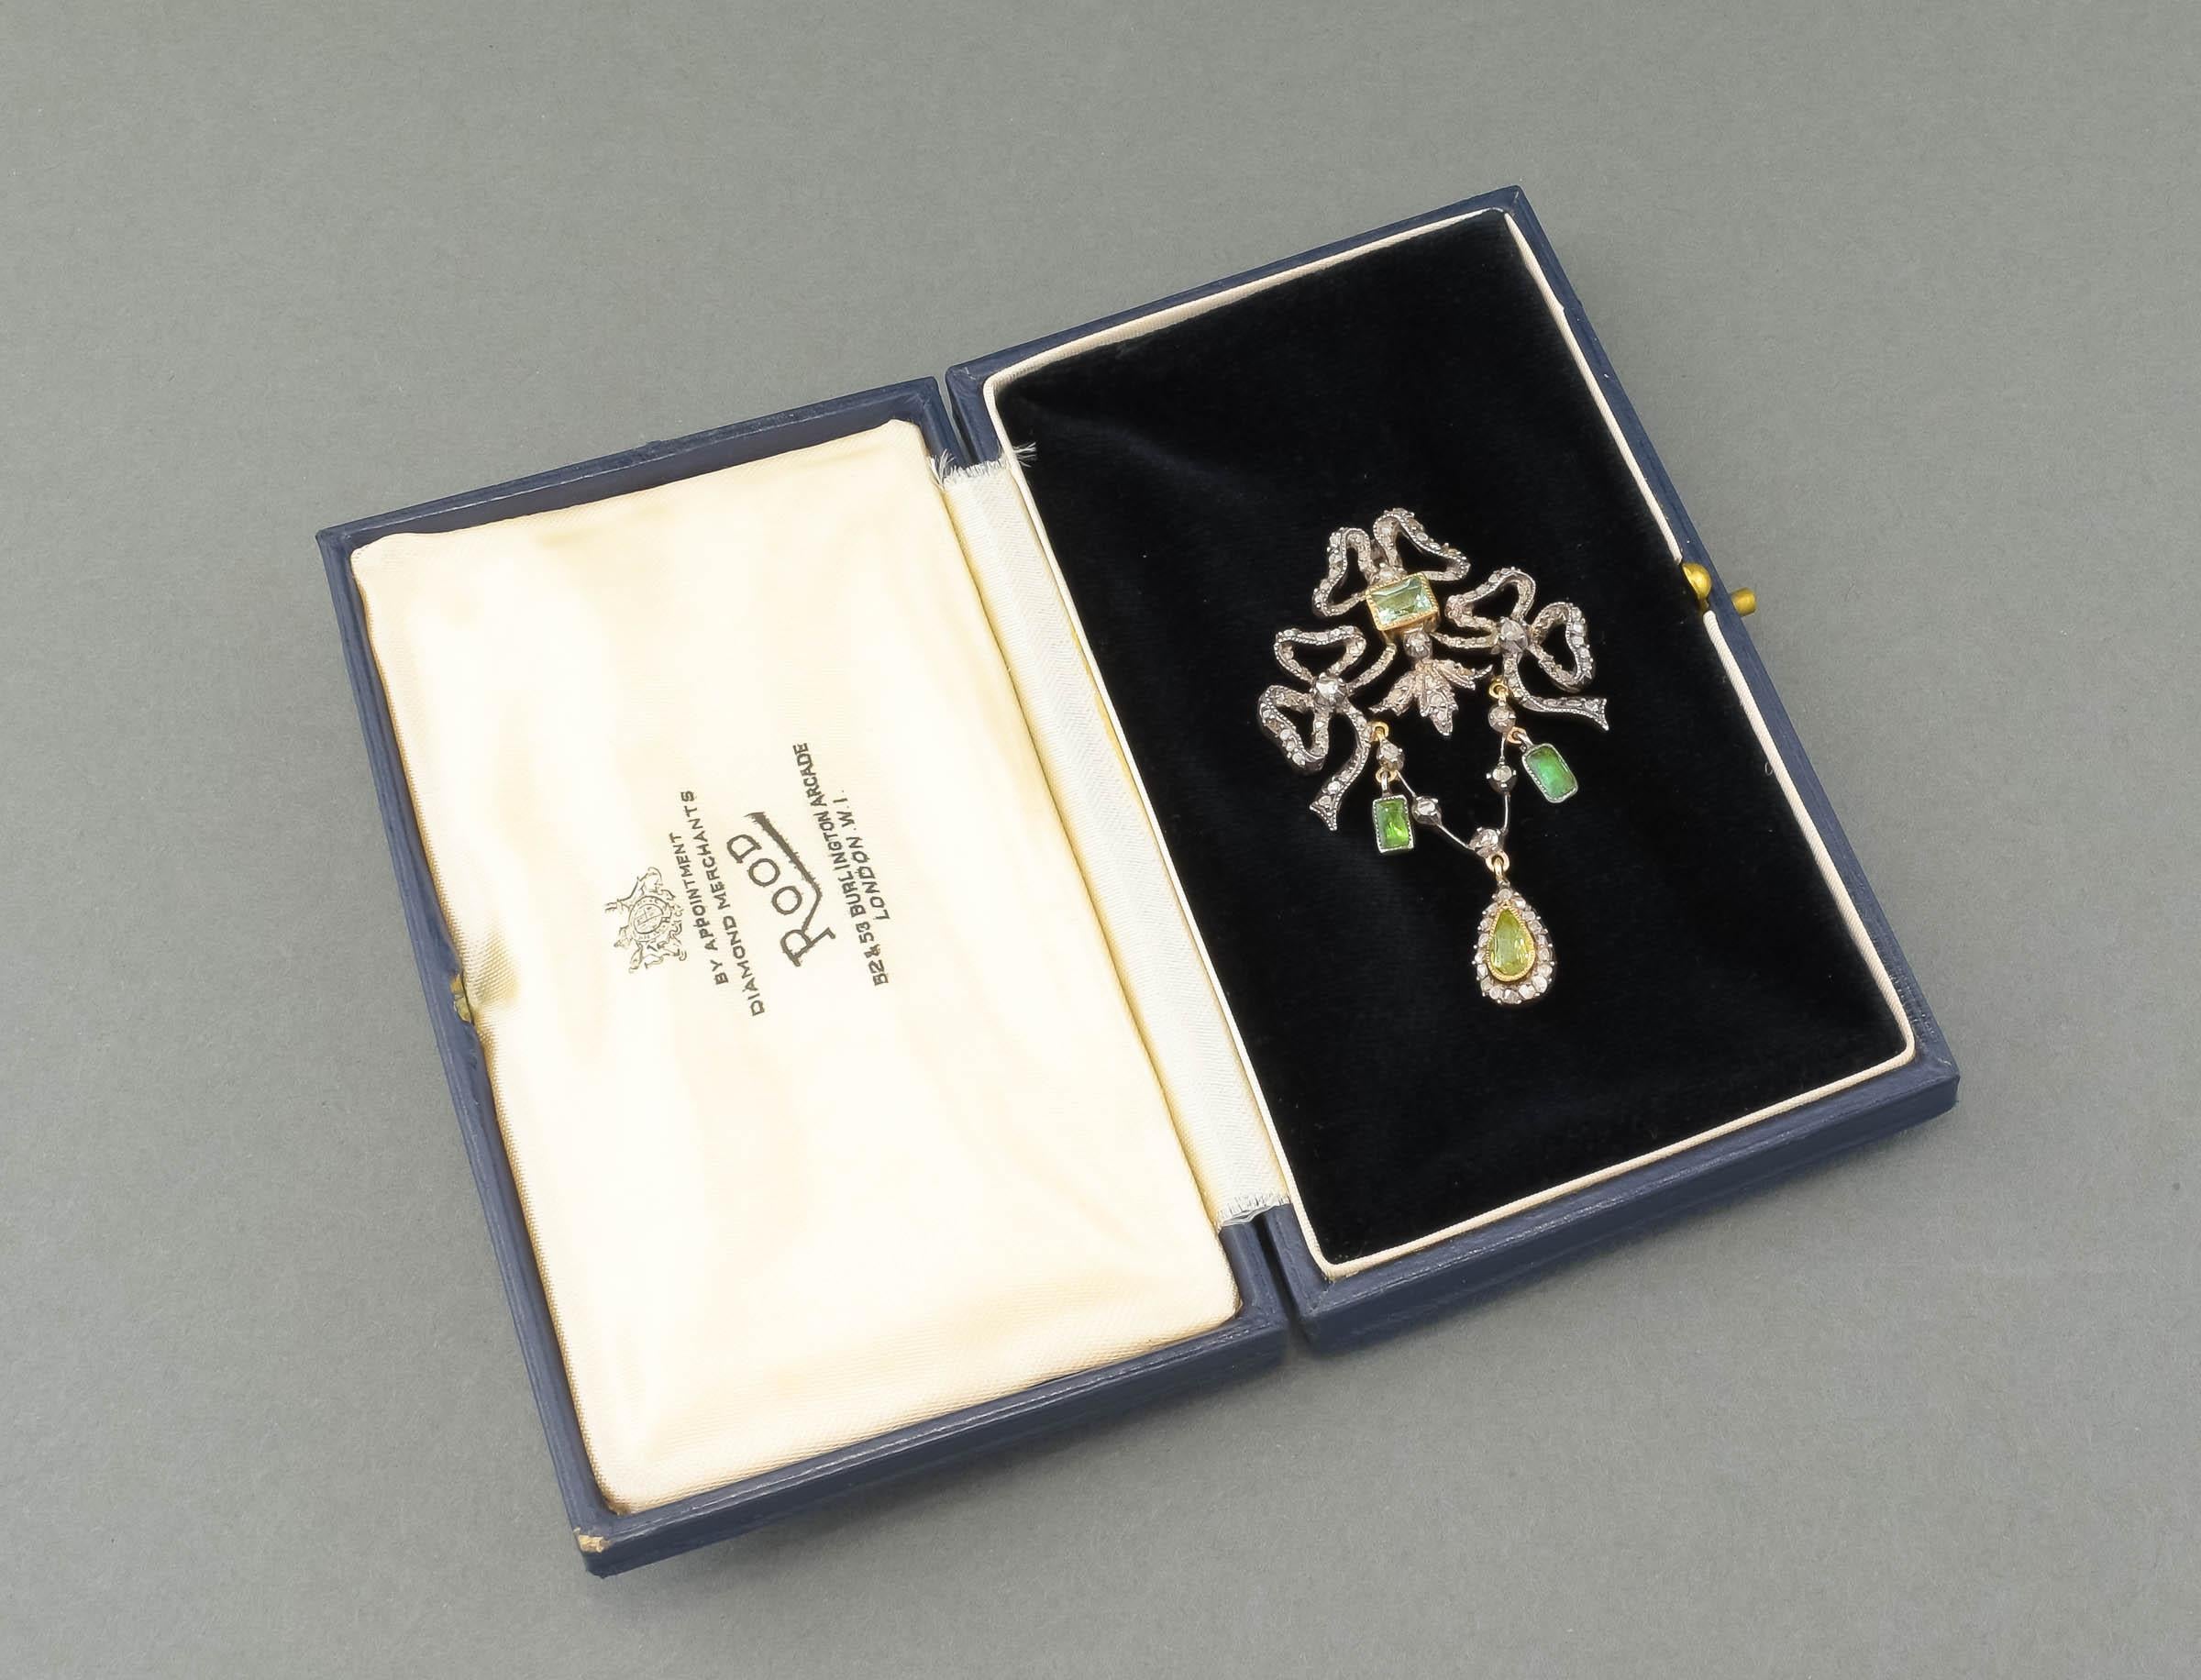 Antique Emerald Diamond Pendant in Gold & Silver with French Hallmarks & Case 1